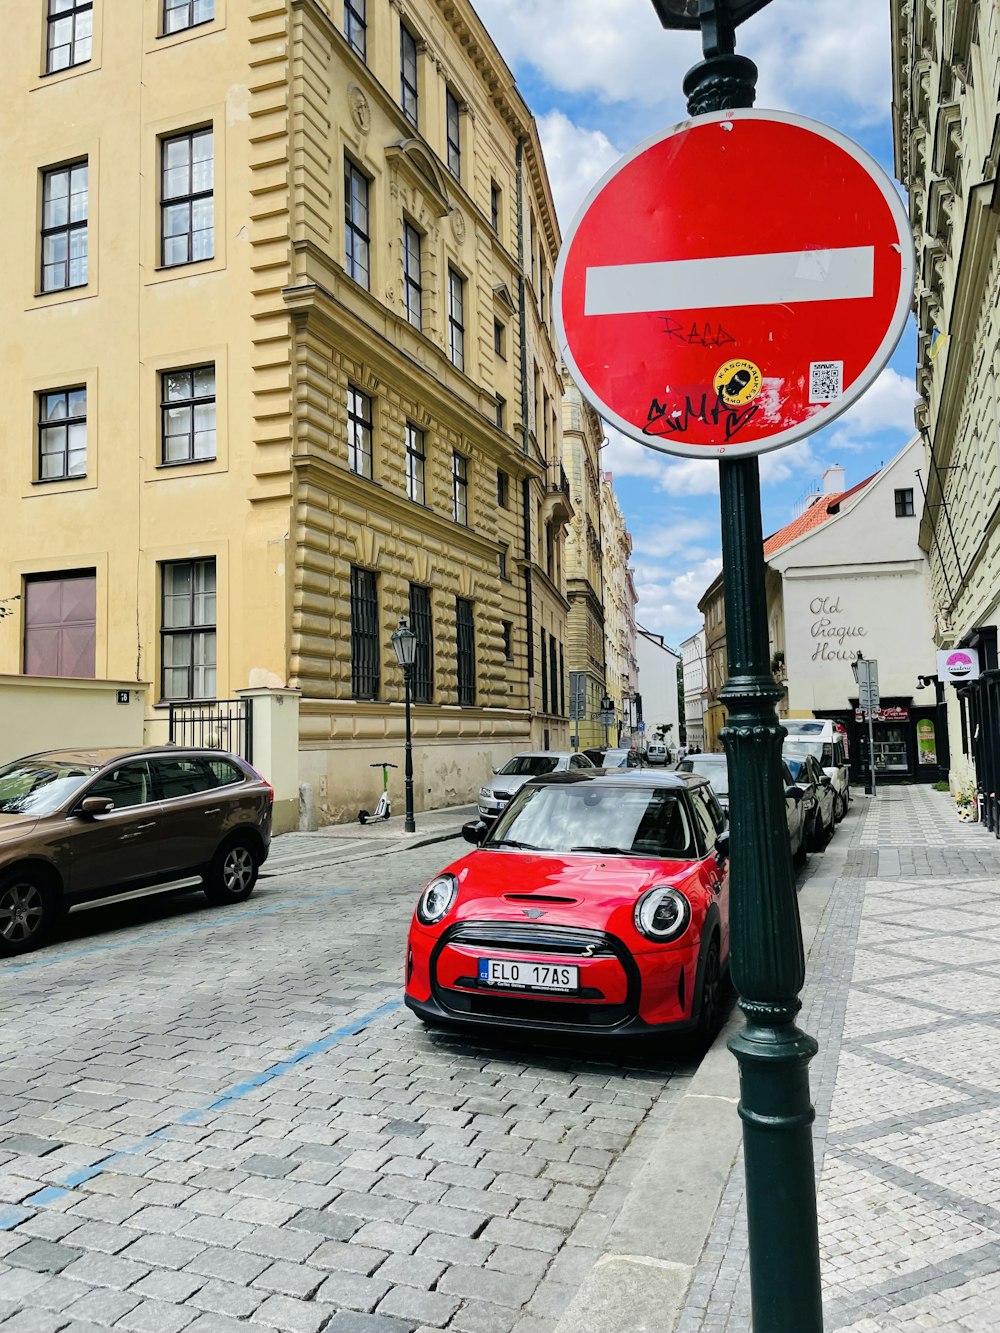 a red car parked next to a street sign